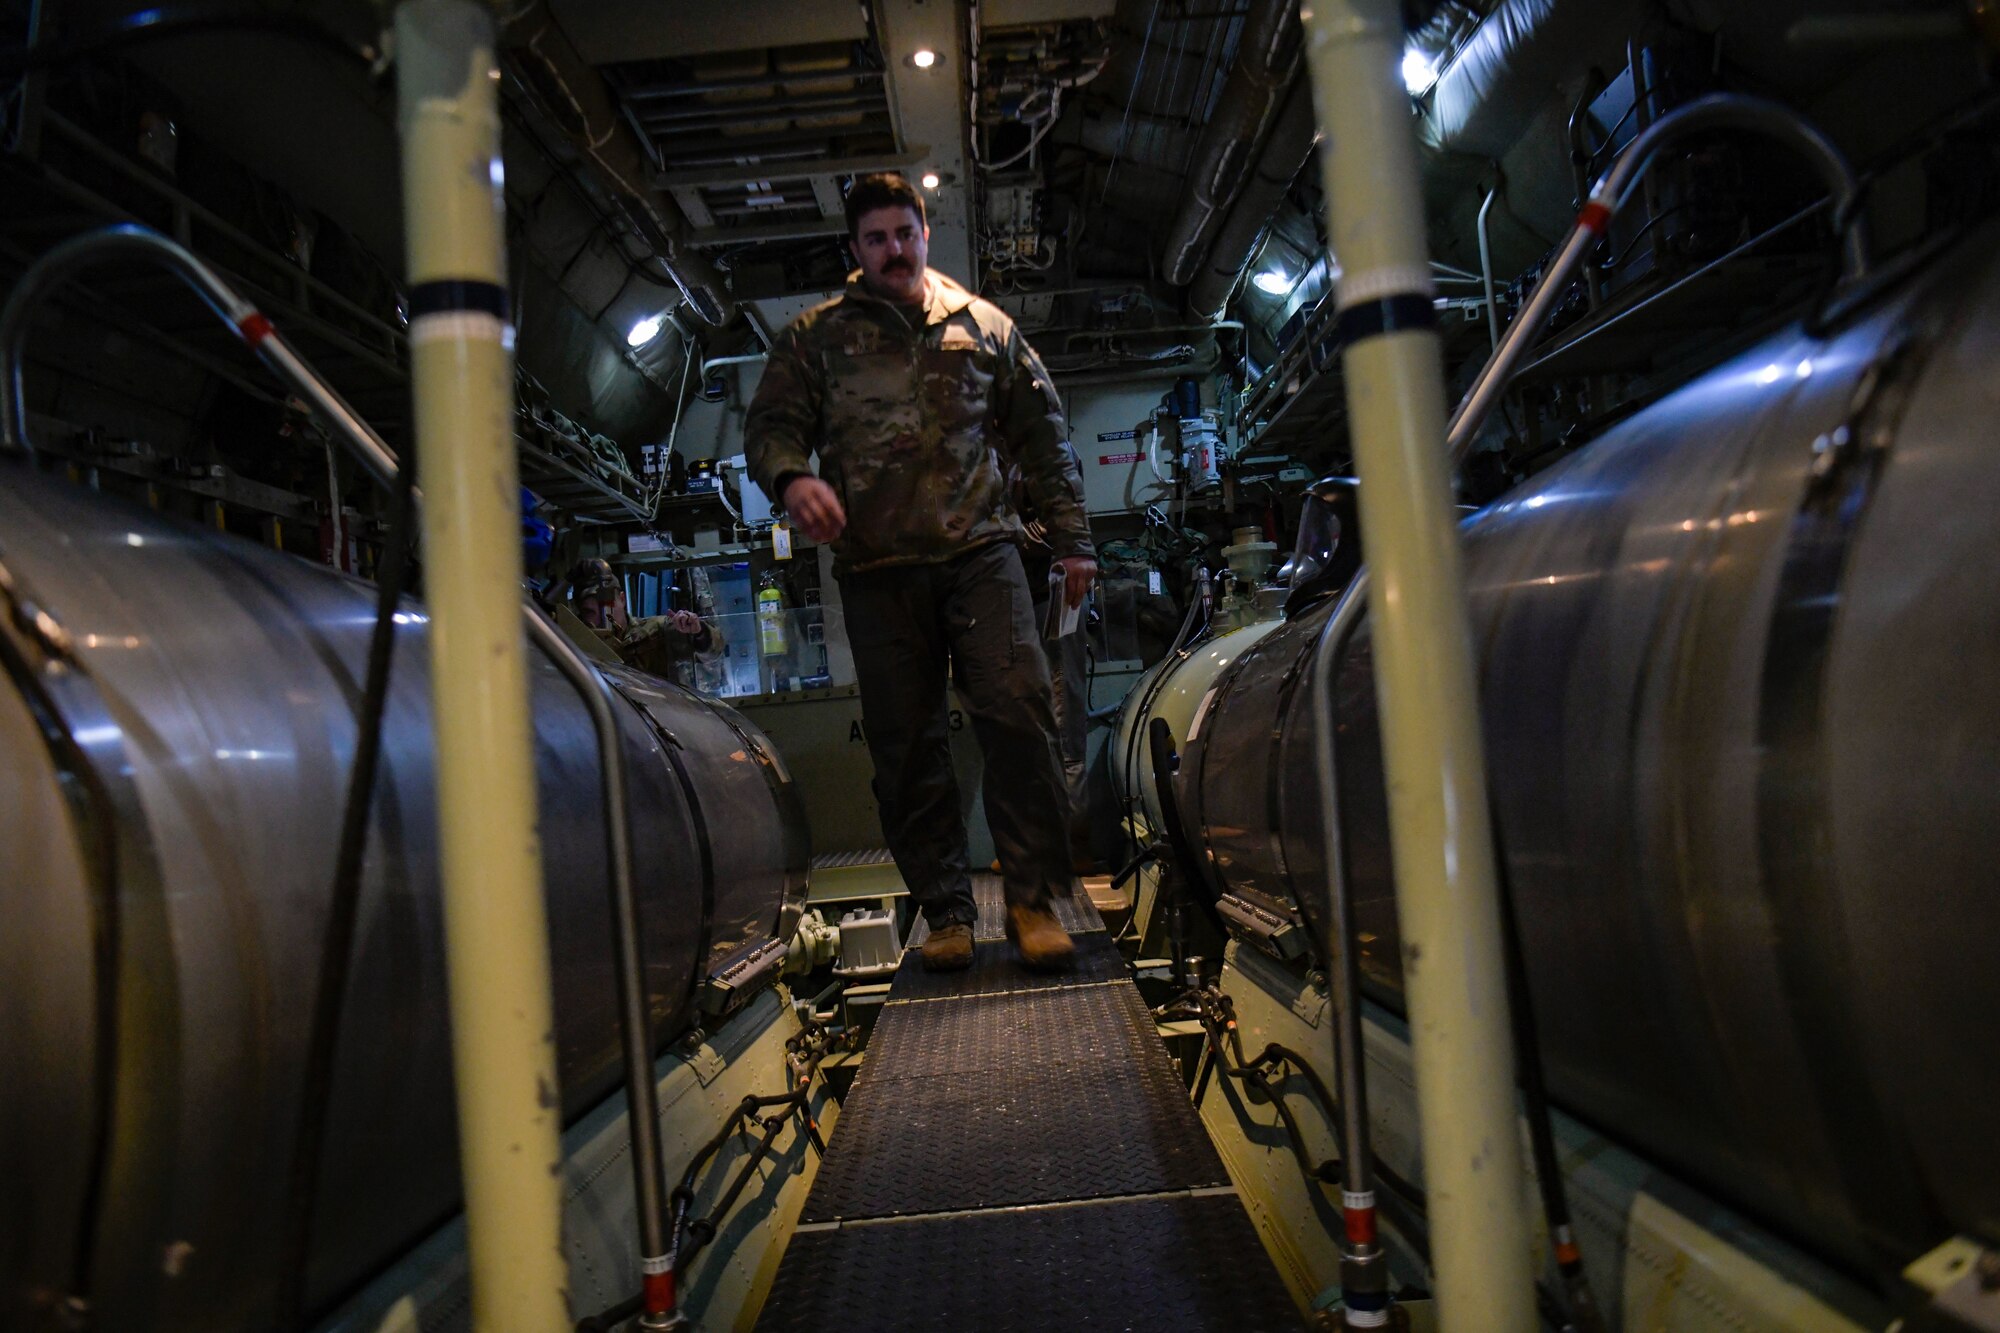 Tech. Sgt. Ethan Sanchez, an aerial spray qualified loadmaster assigned to the 757th Airlift Squadron, runs preflight checks on a modular aerial spray system aboard an aerial spray modified C-130H Hercules aircraft assigned to the 910th Airlift Wing, Youngstown Air Reserve Station, Ohio, on March 14, 2023, at Hill Air Force Base, Utah.